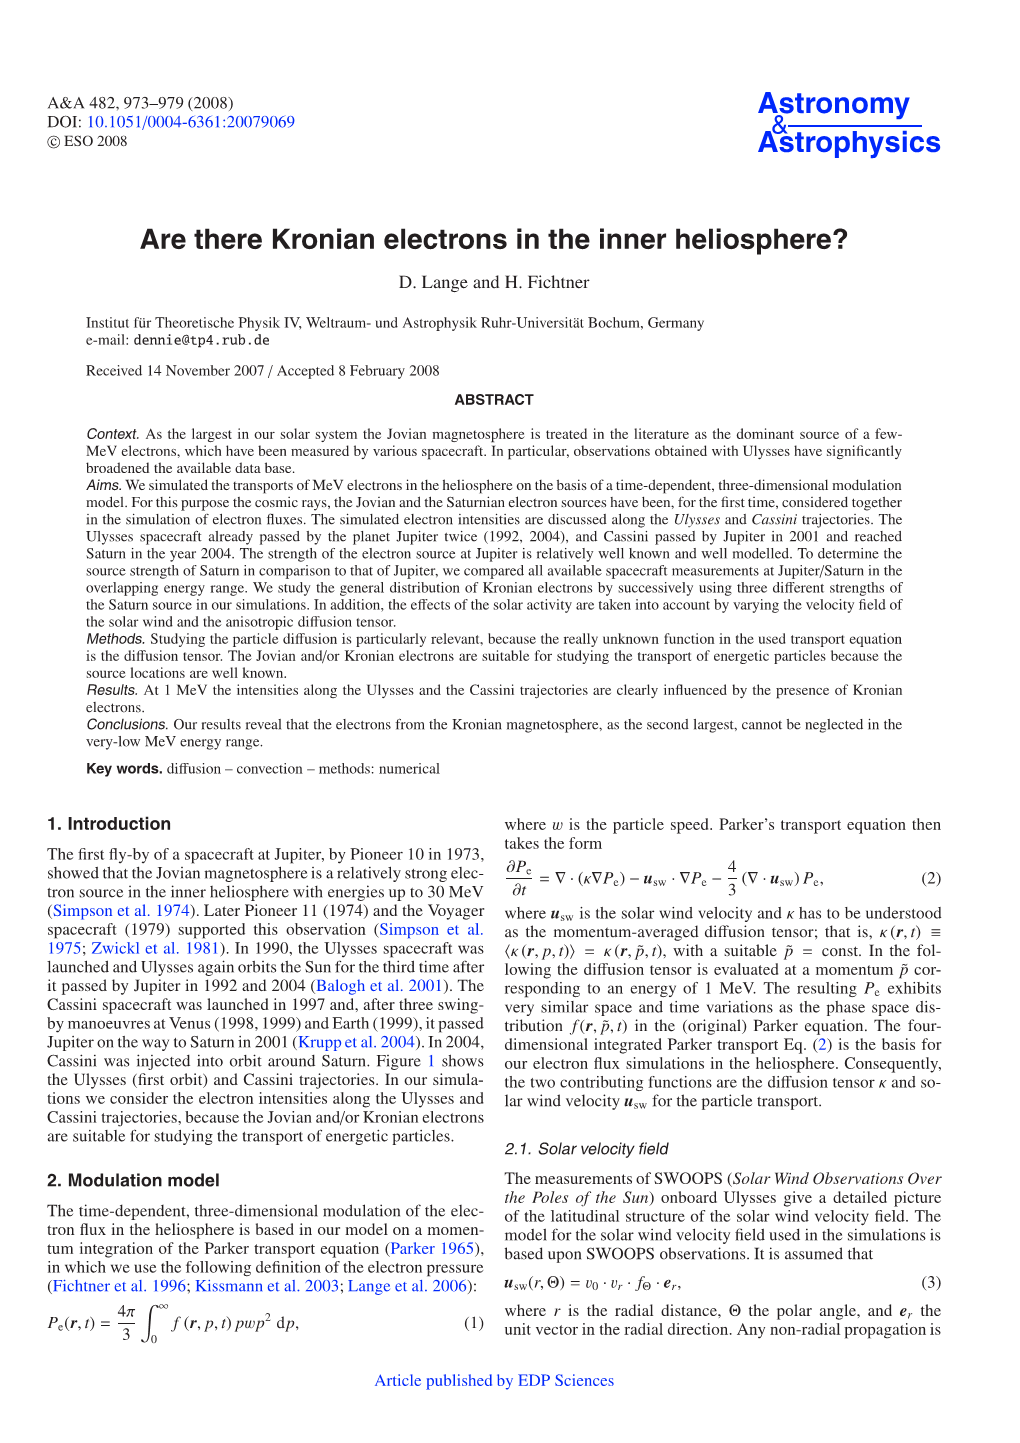 Are There Kronian Electrons in the Inner Heliosphere?